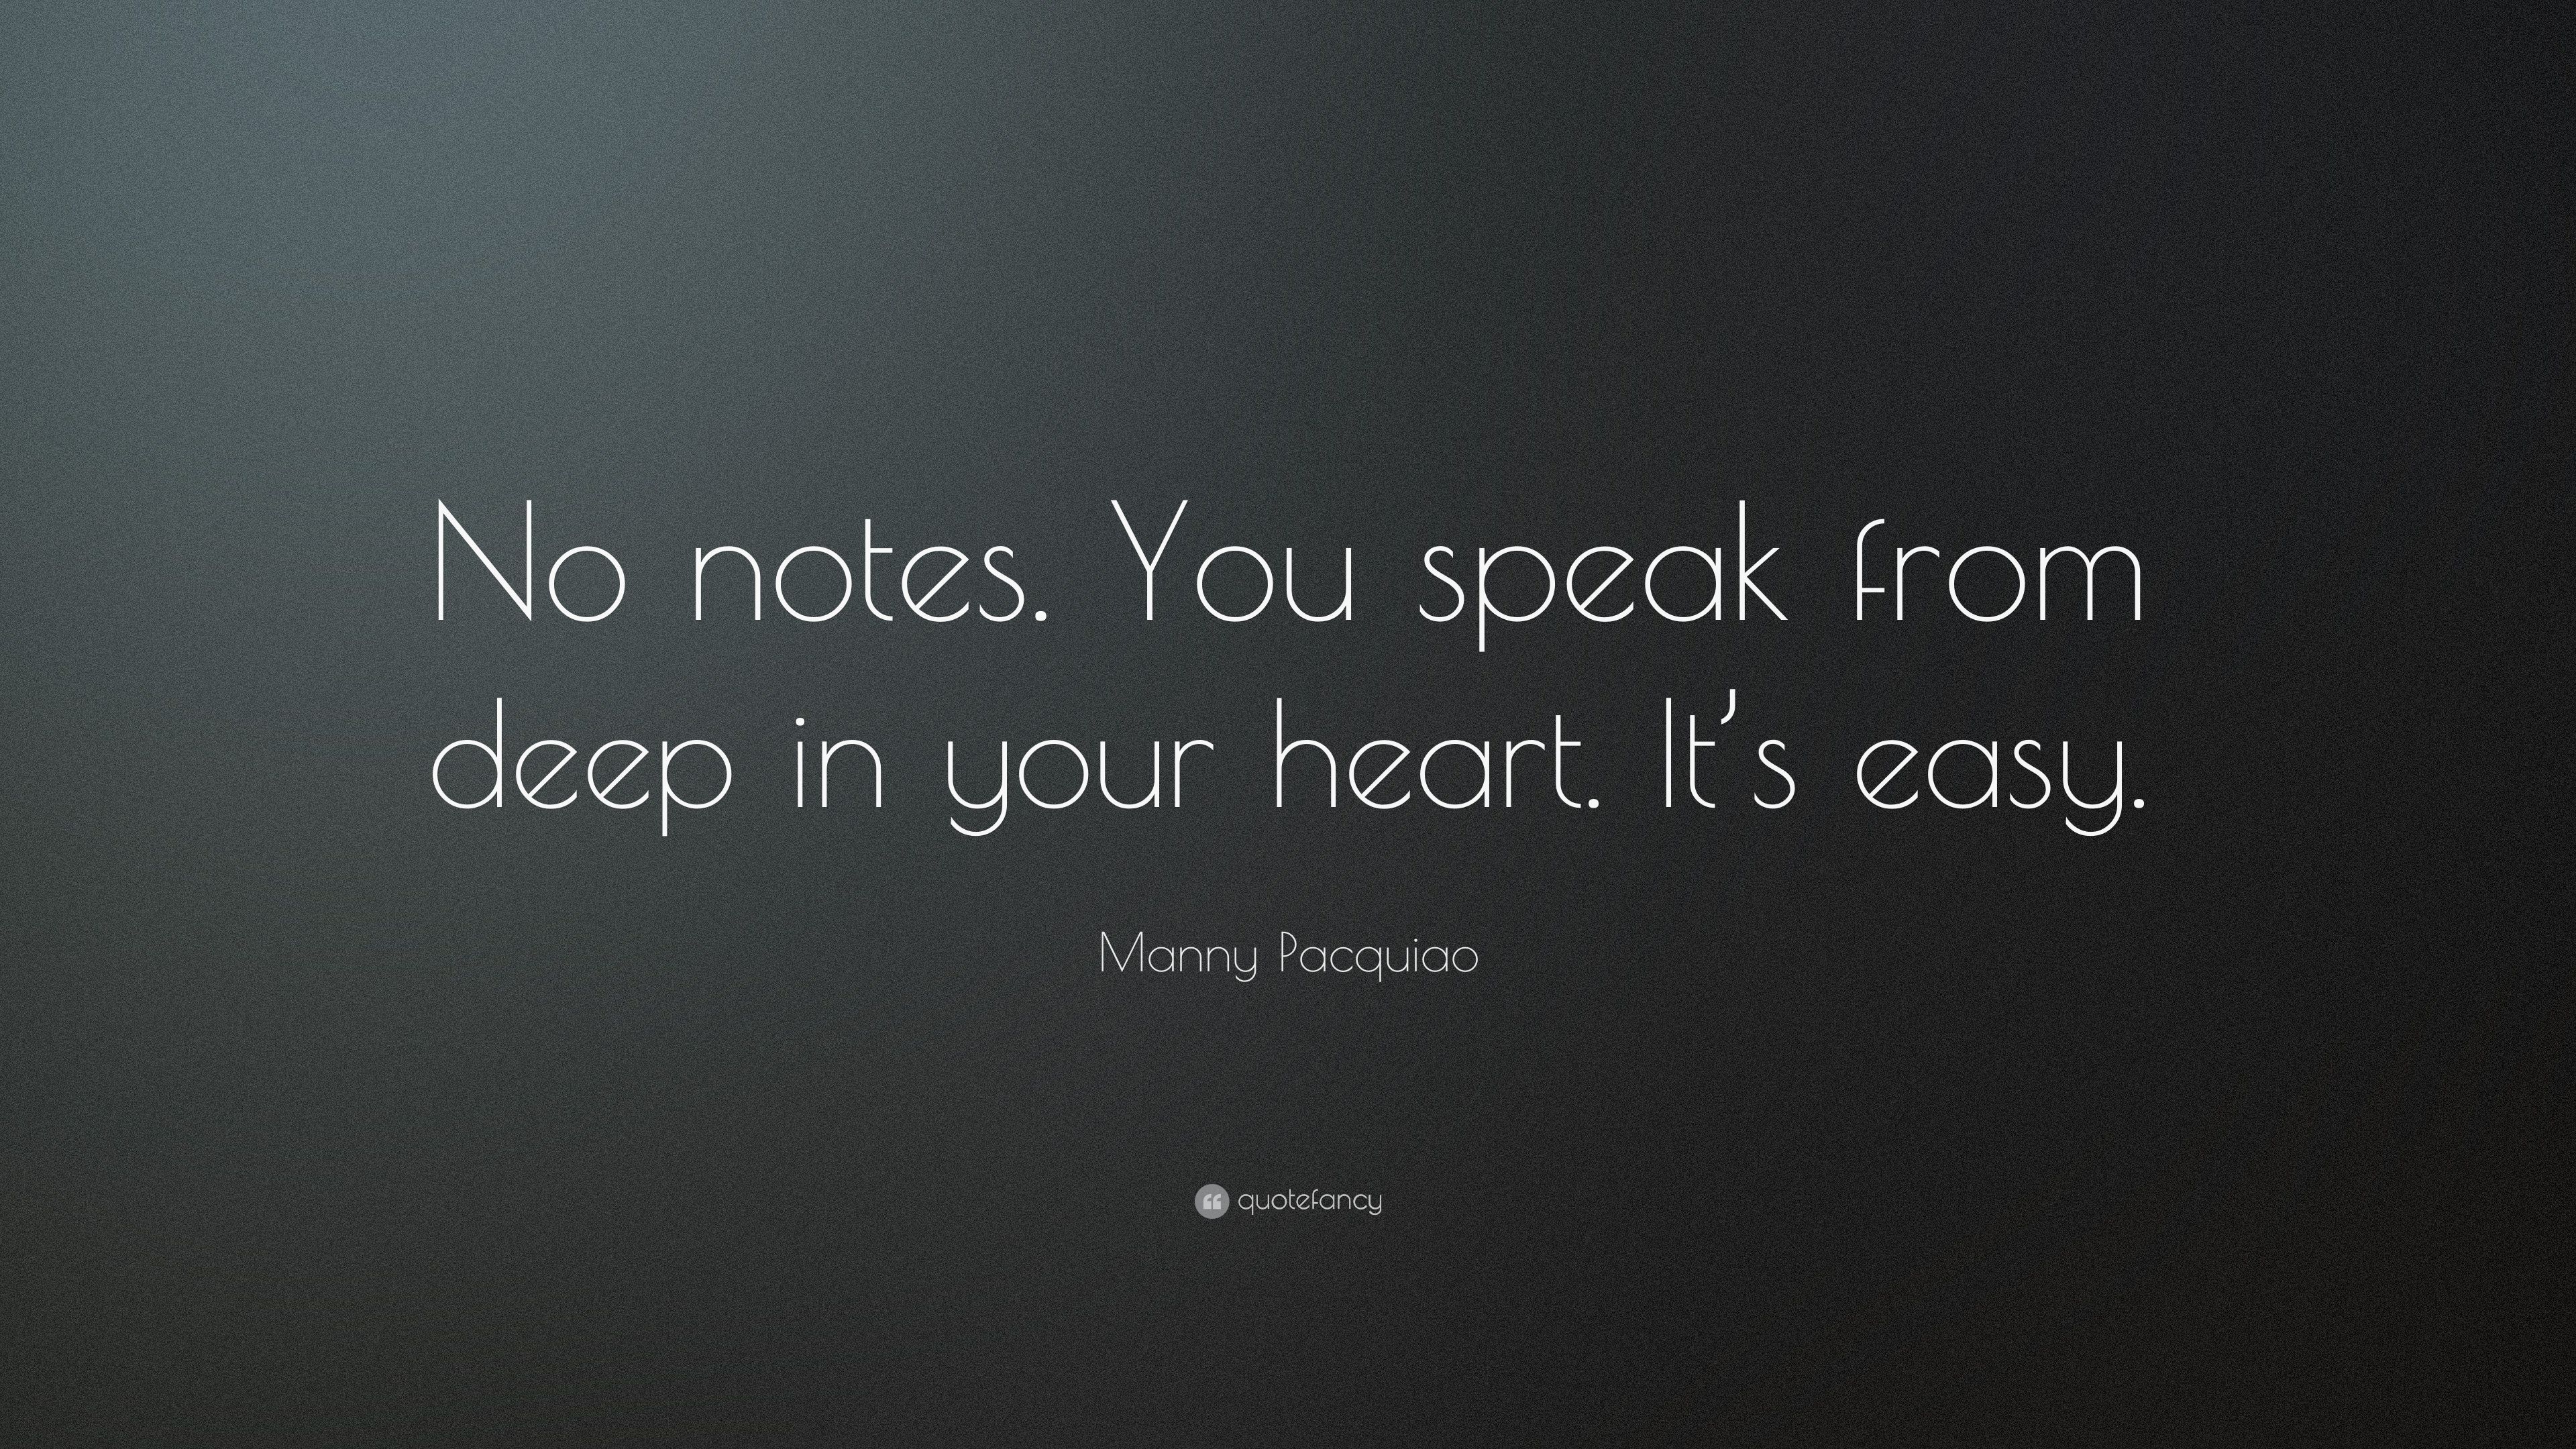 Manny Pacquiao Quote: “No notes. You speak from deep in your heart ...